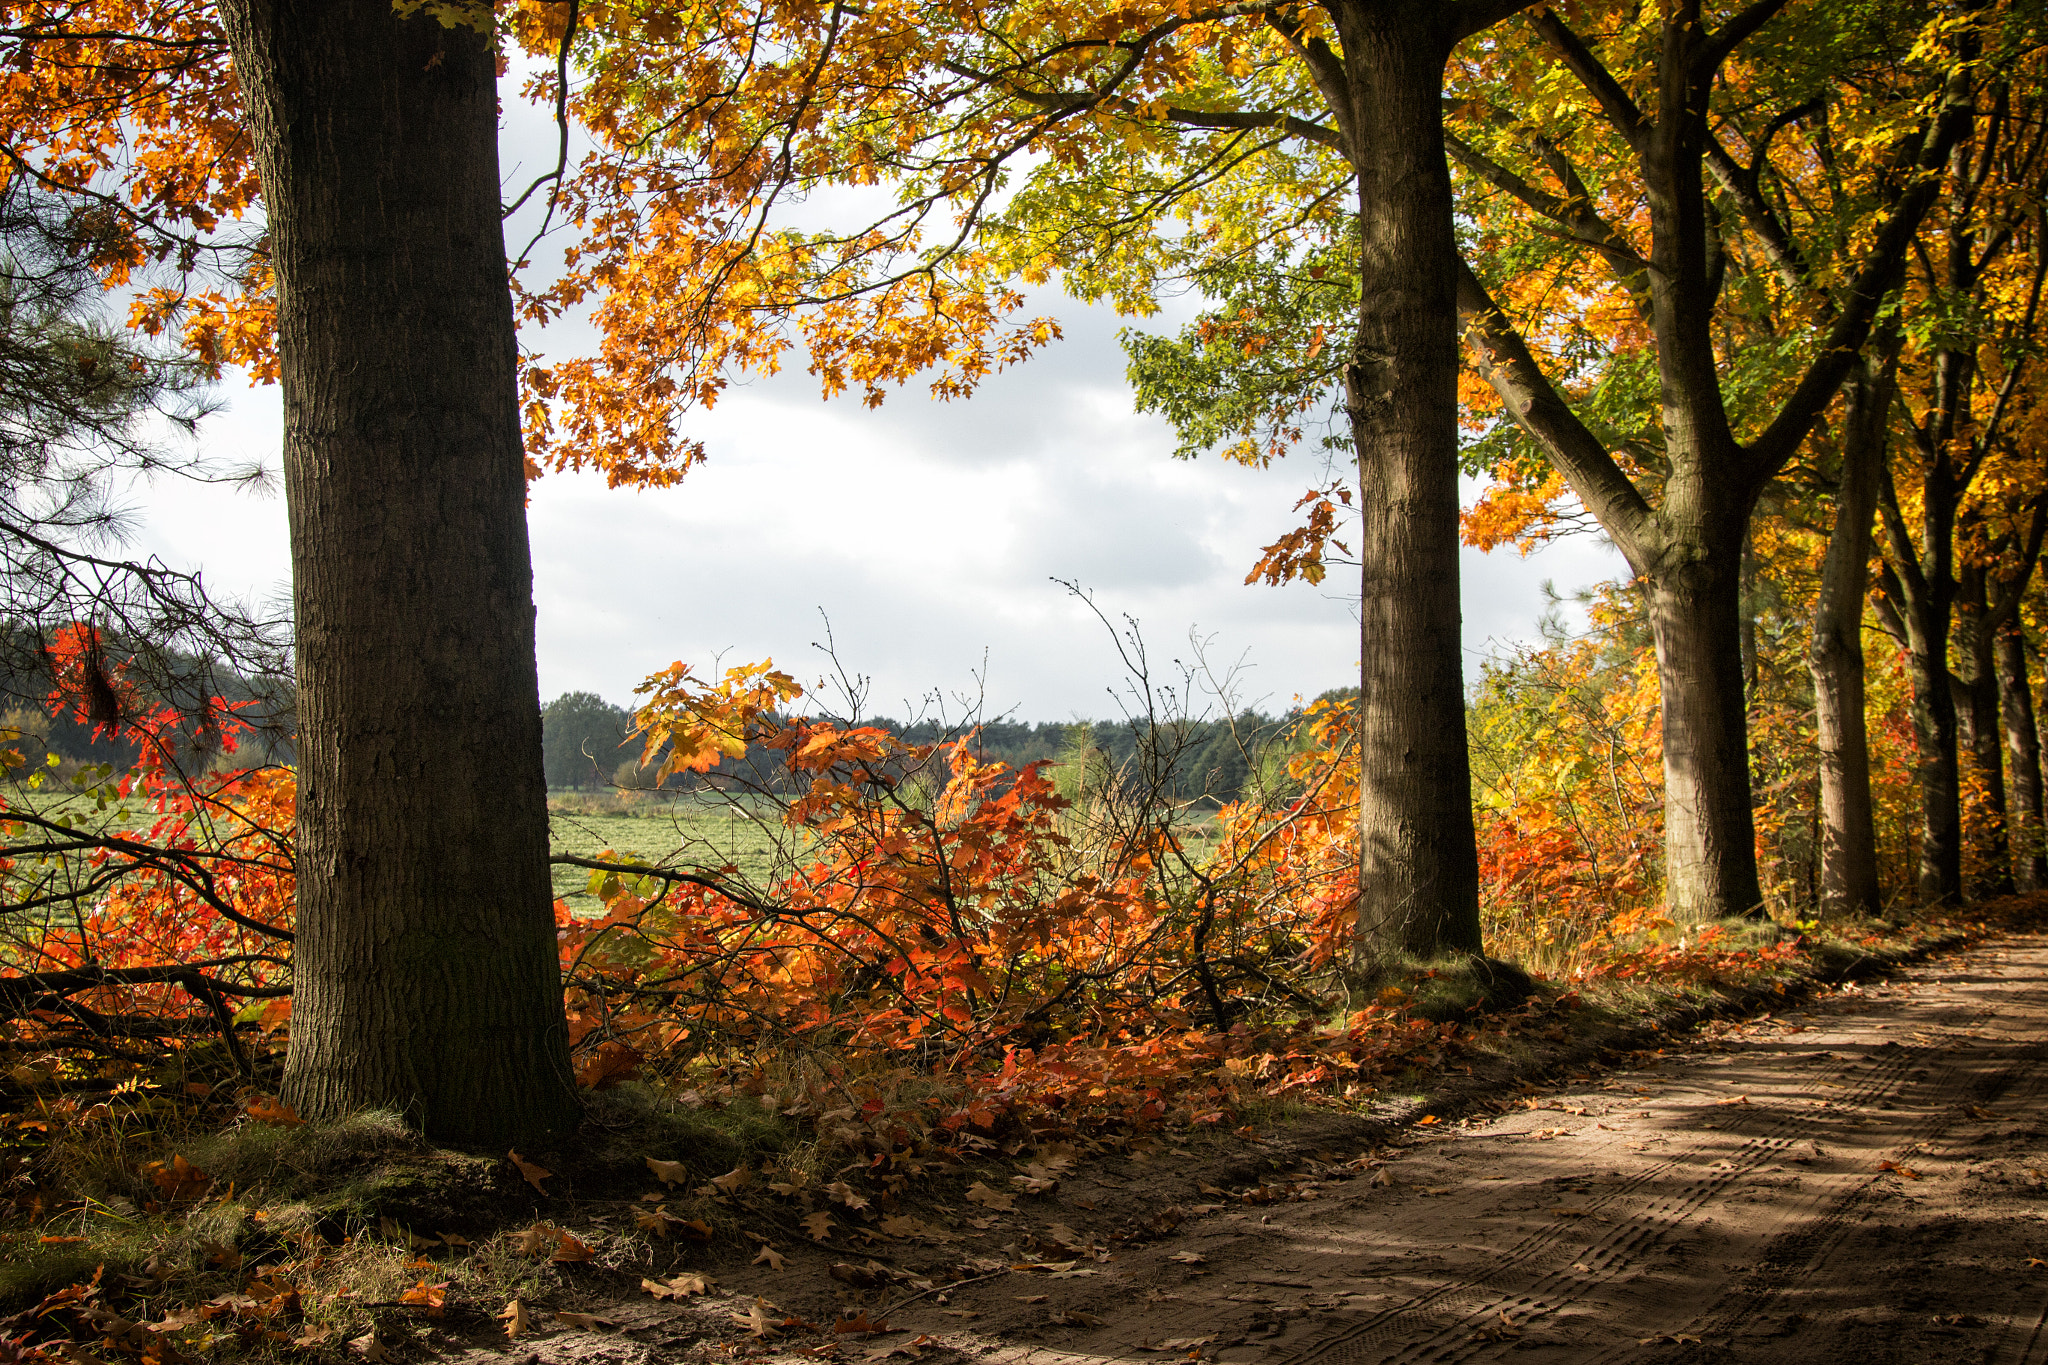 Canon EOS 70D + Sigma 24-105mm f/4 DG OS HSM | A sample photo. Autumn in holland photography